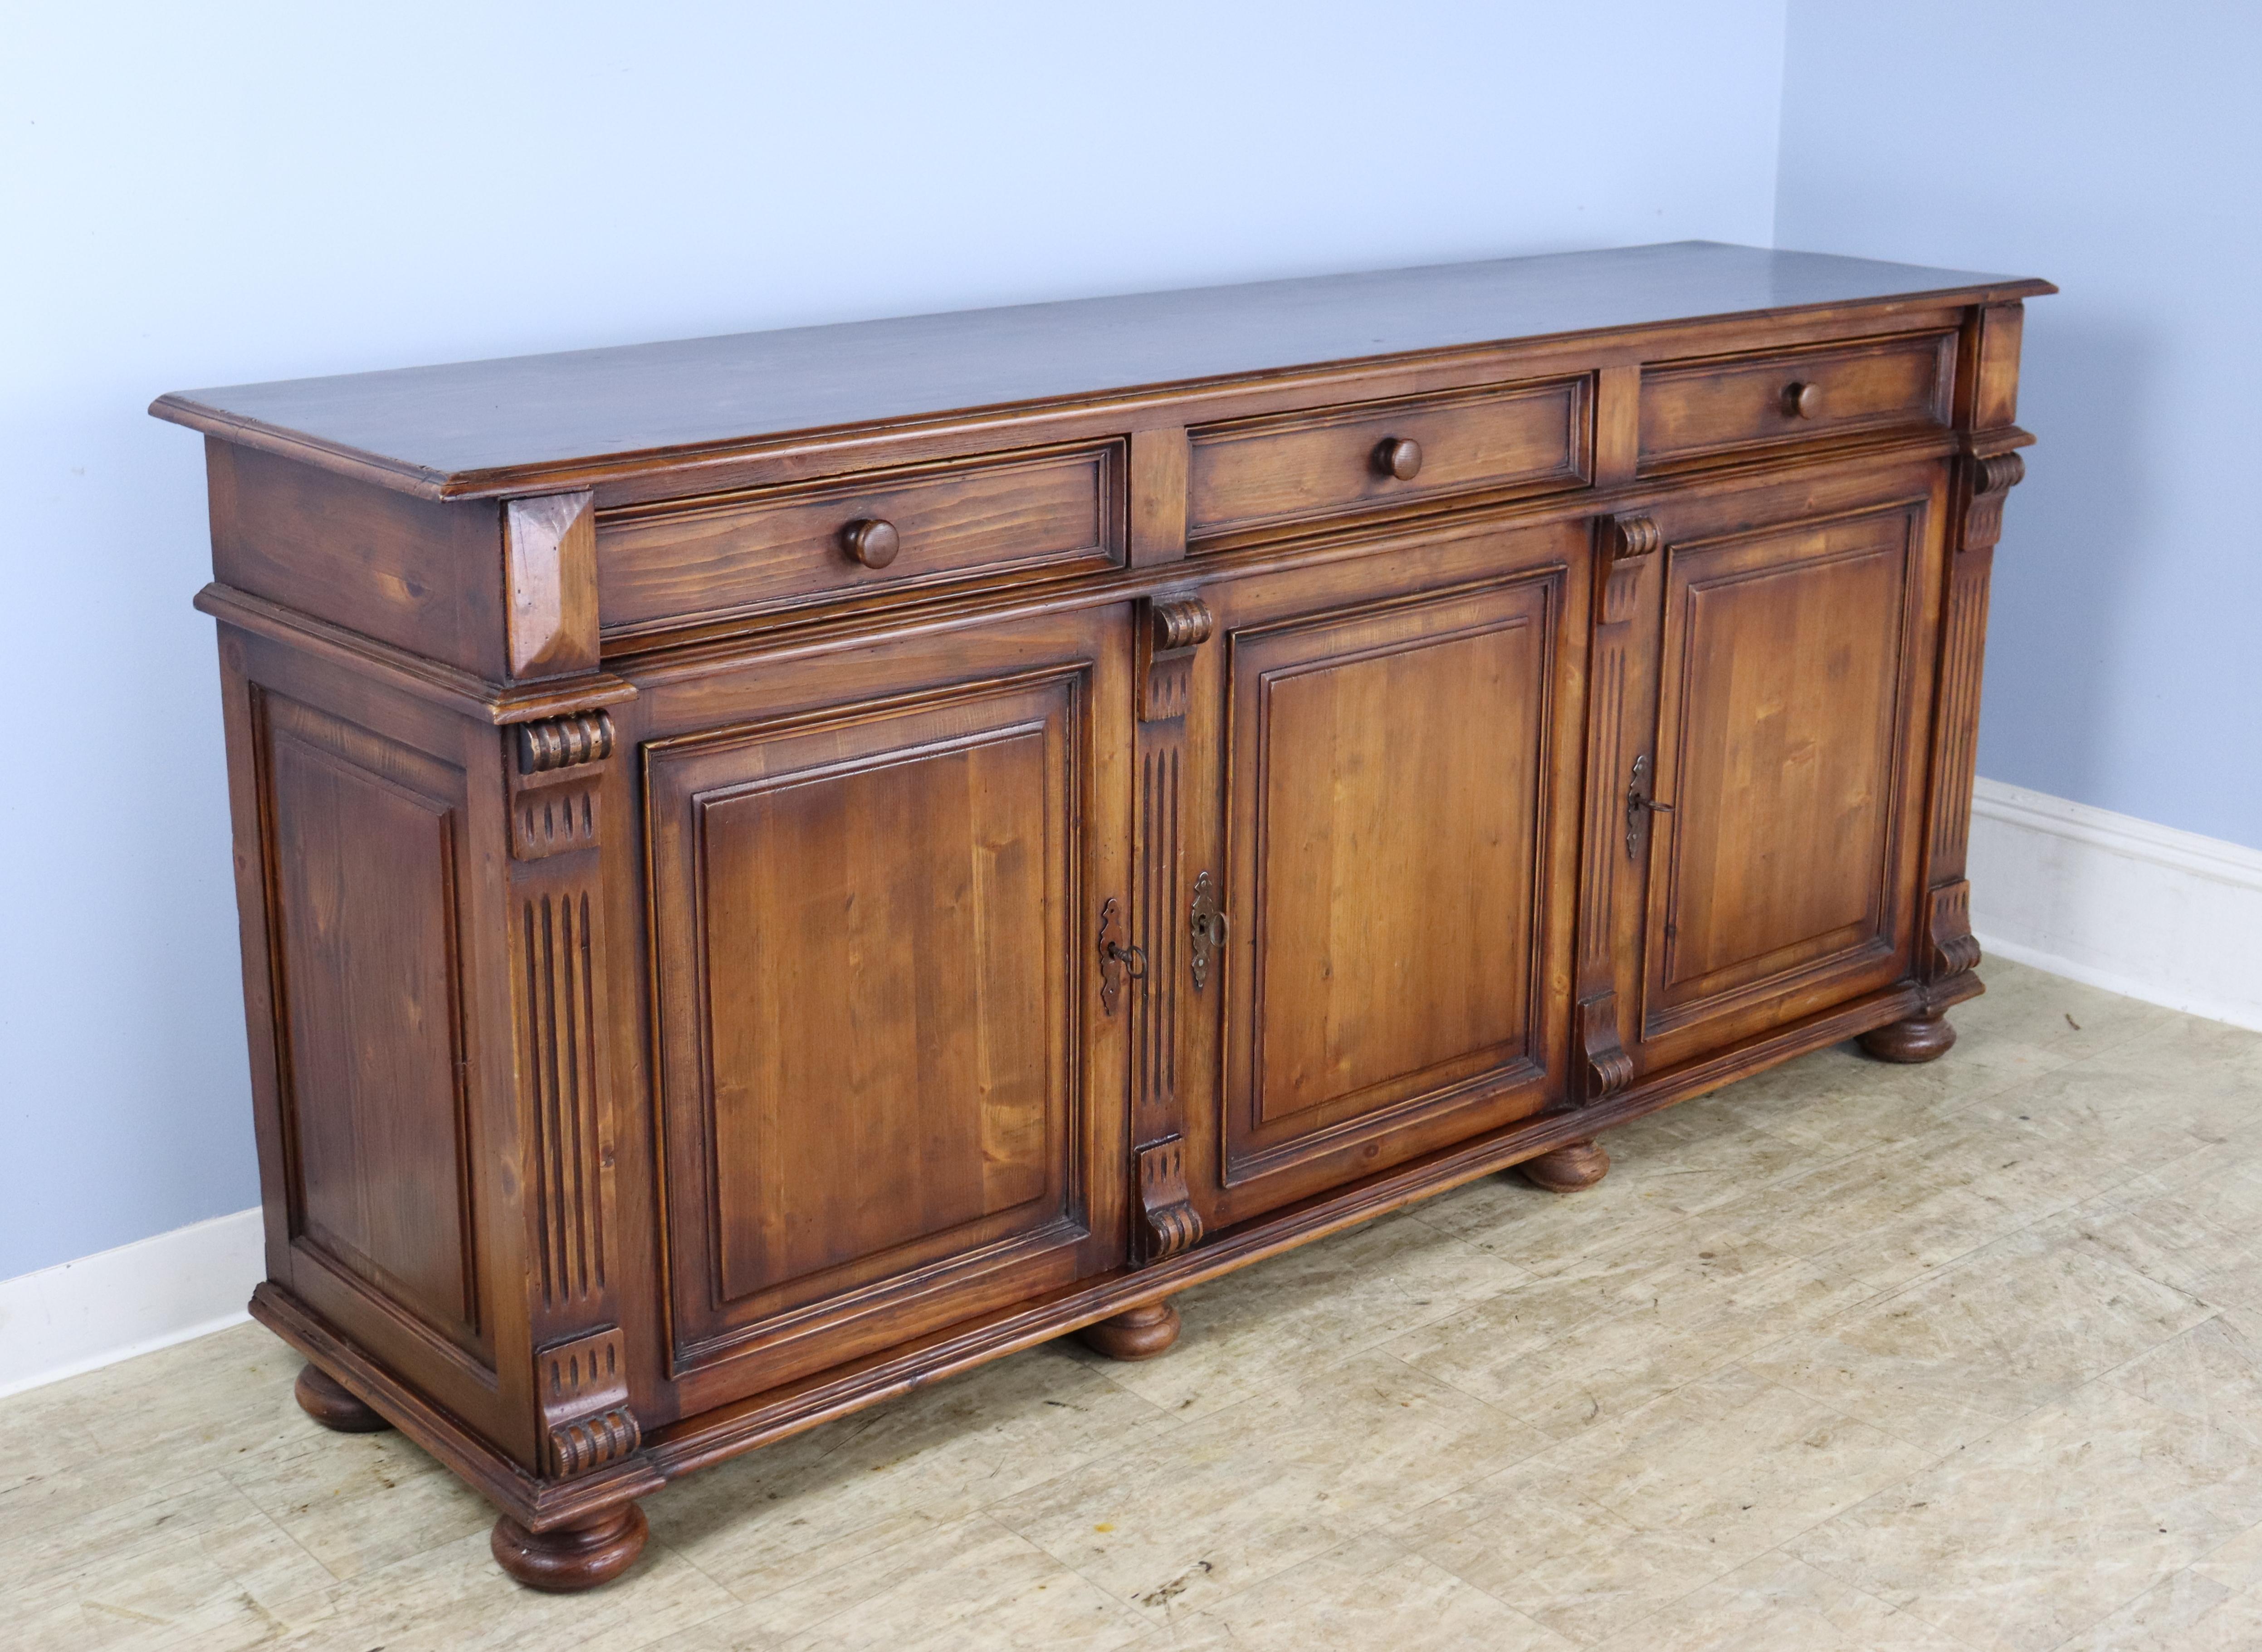 A handsome pine enfilade or buffet from France.  Great details such as reeded carvings along the doors, elegant moldings and good bun feet.  Each door has its own original key, and the interior shelving is non-adjustable.